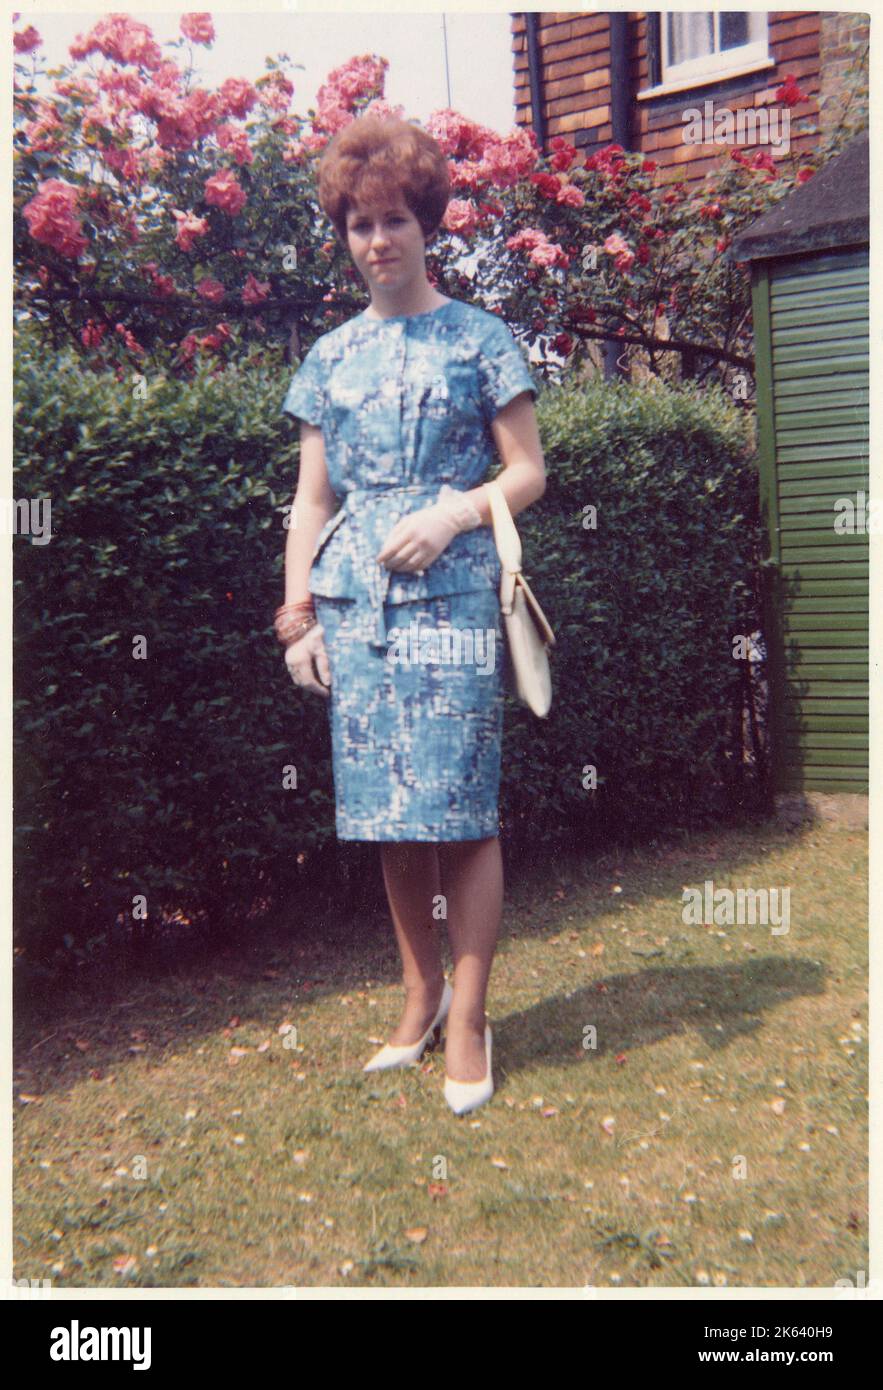 A young lady in a smart two-piece blue and white summer outfit (with matching white leather handbag) standing beside a neatly-clipped hedge and pink rose bush in a British suburban back garden. Stock Photo